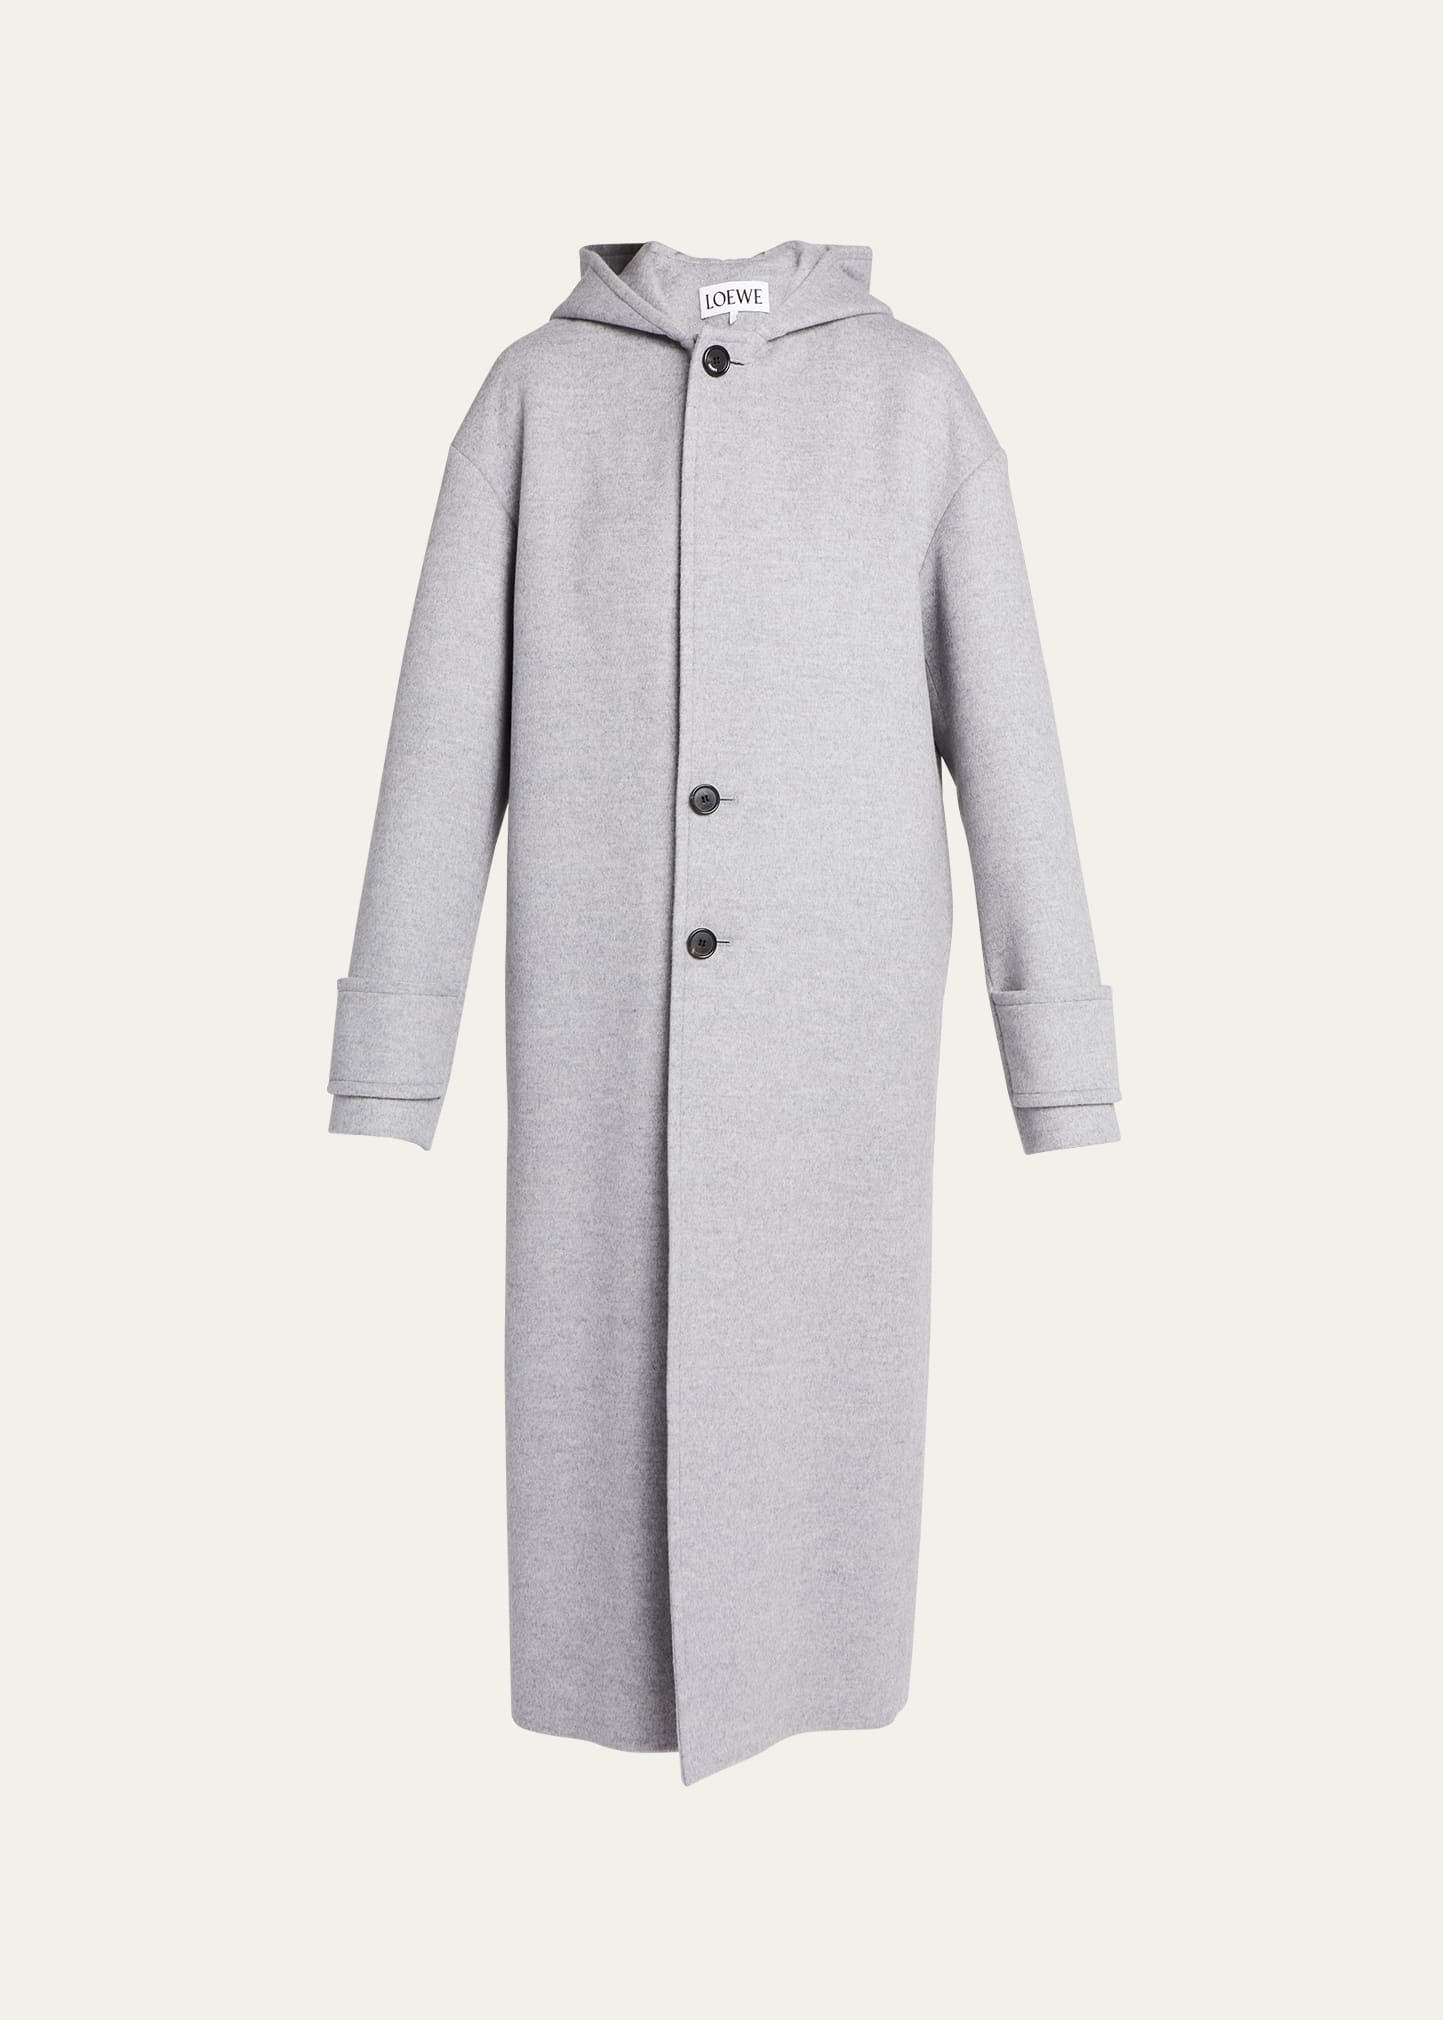 Hooded Wool Top Coat with Button Vent